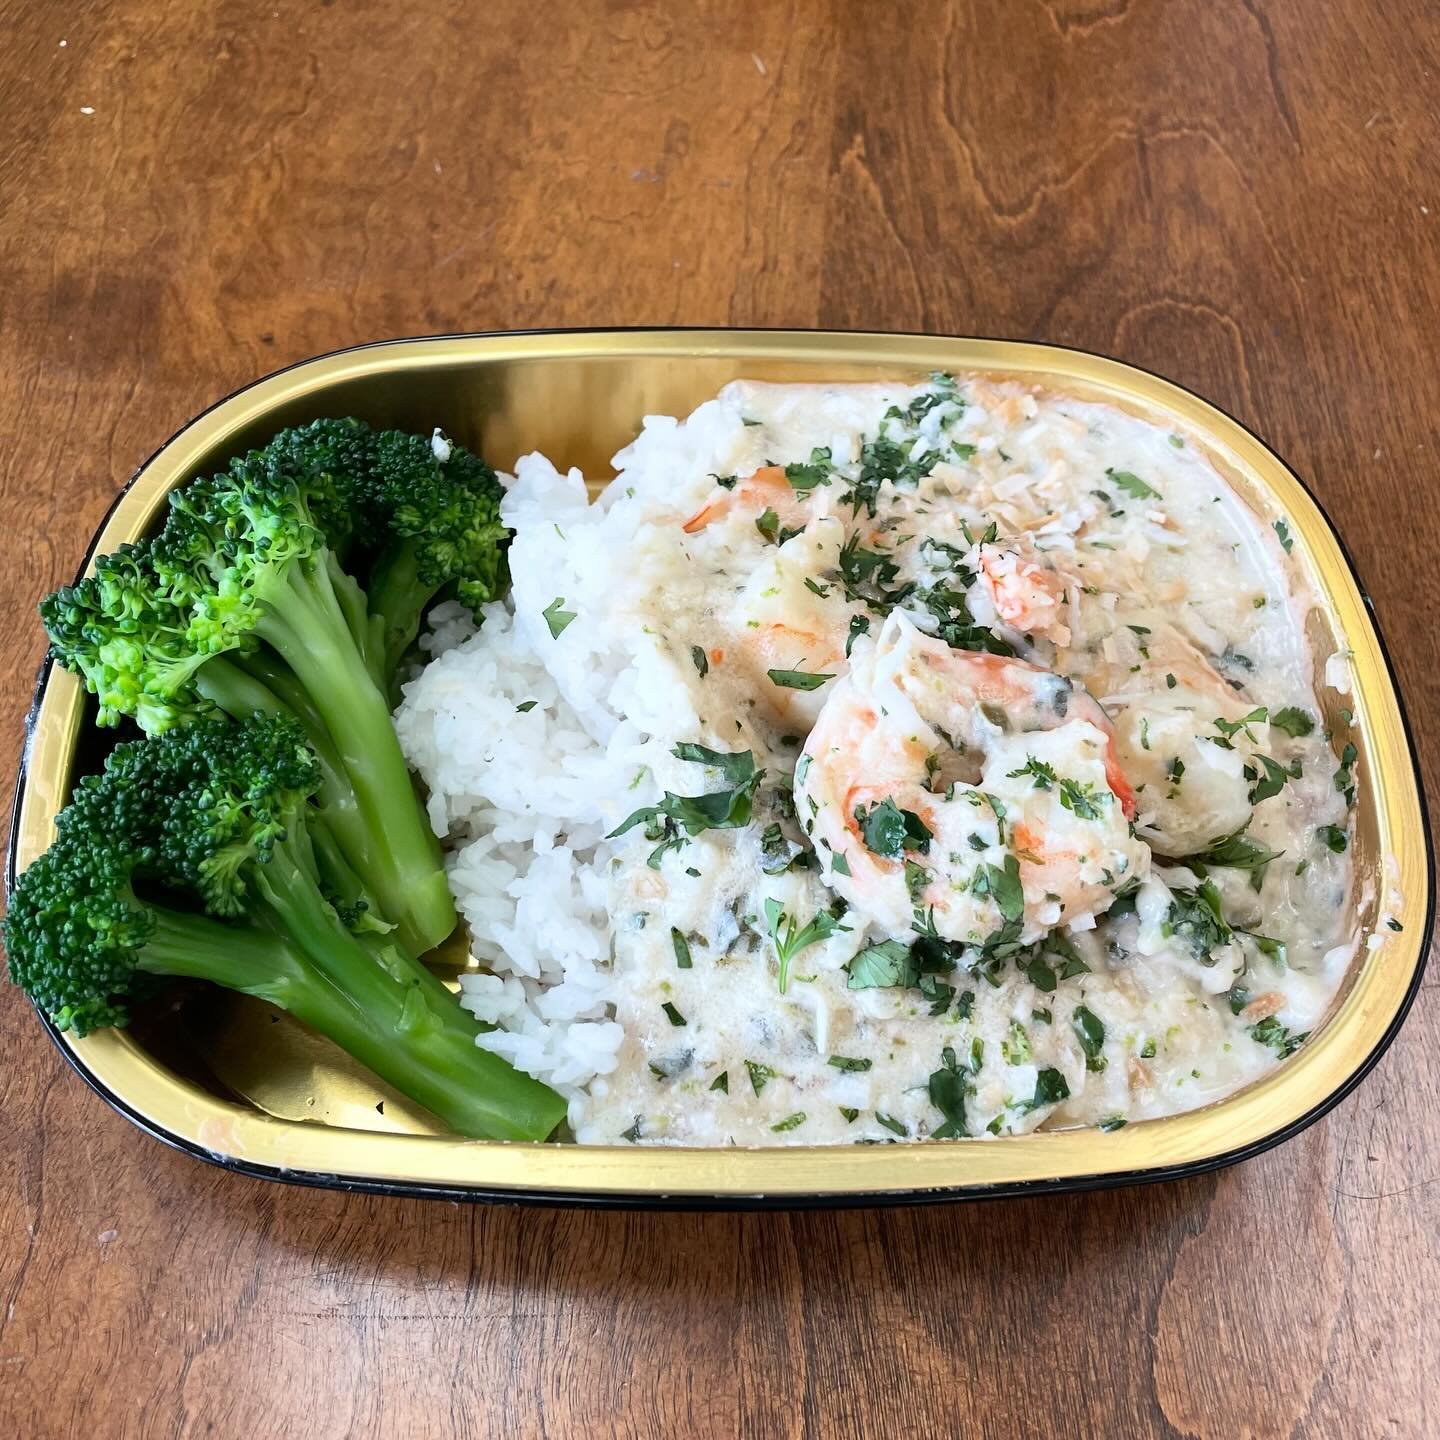 Yesterday&rsquo;s additions to the line-up - Coconut Lime Shrimp, Meatballs in Pomegranate Sauce, Turkey Stuffing Casserole, Chinese Vegetables with Noodles, and a &ldquo;Small and Simple&rdquo; Grilled Shrimp Dinner. Check out the full list on the w